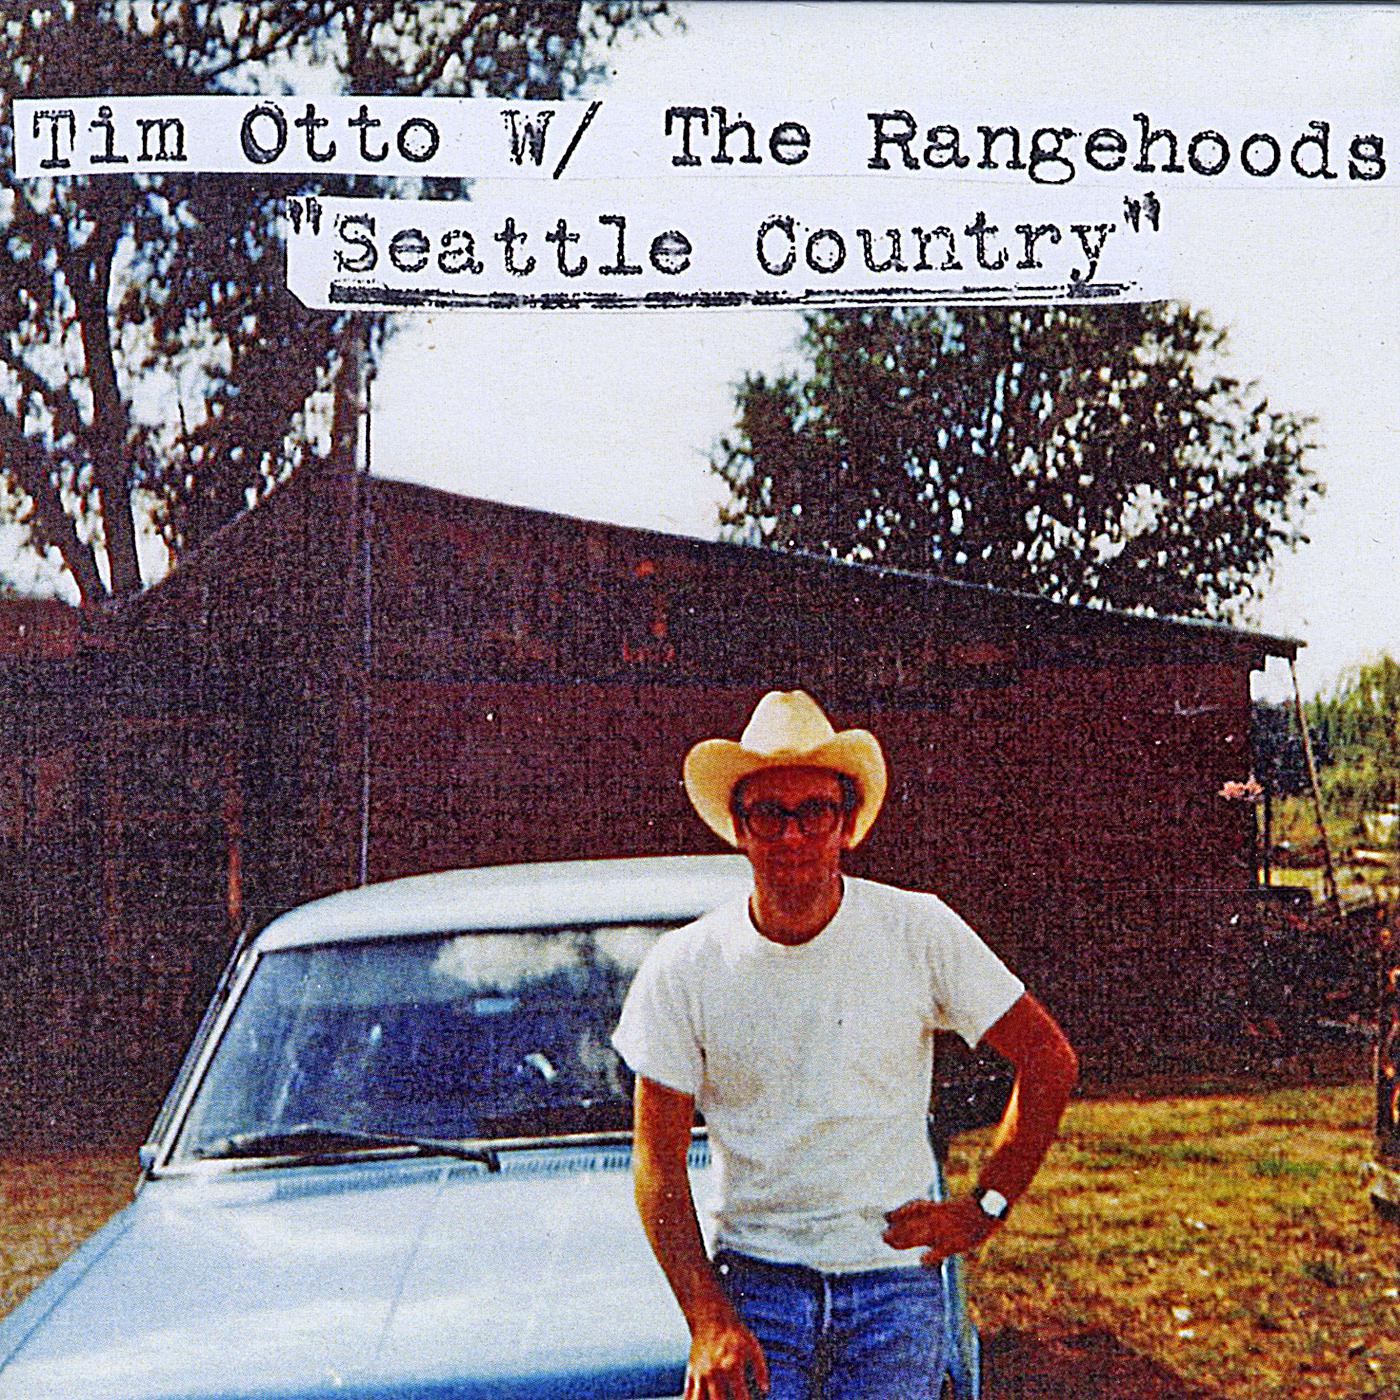 Seattle Country